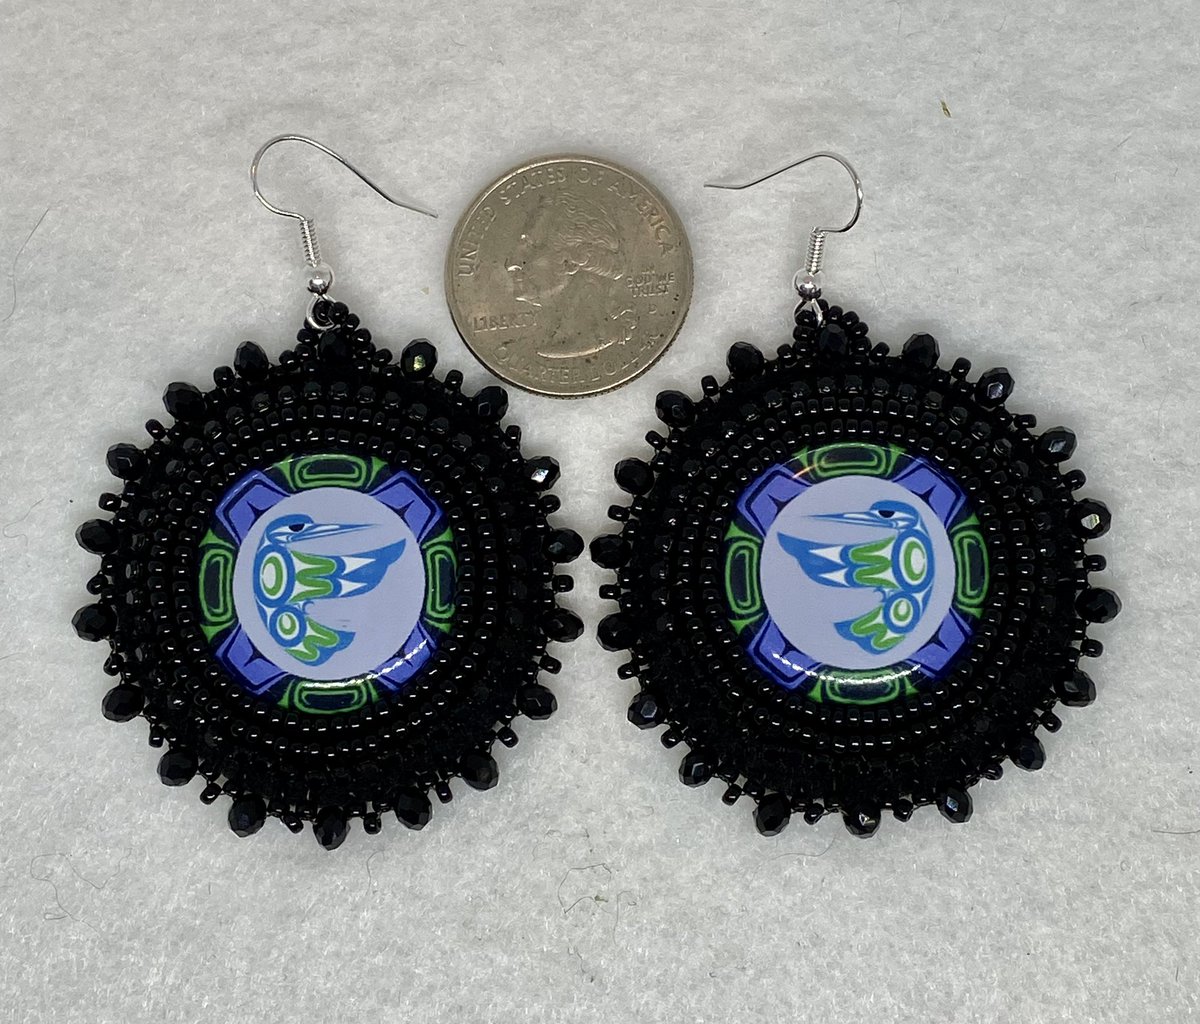 Two pair of formline hummingbird available NOW for $70, free shipping w code YODA at checkout-tell Auntie!
@NDNbeadmarket @IndigenousBeads 

look-beadwork.myshopify.com